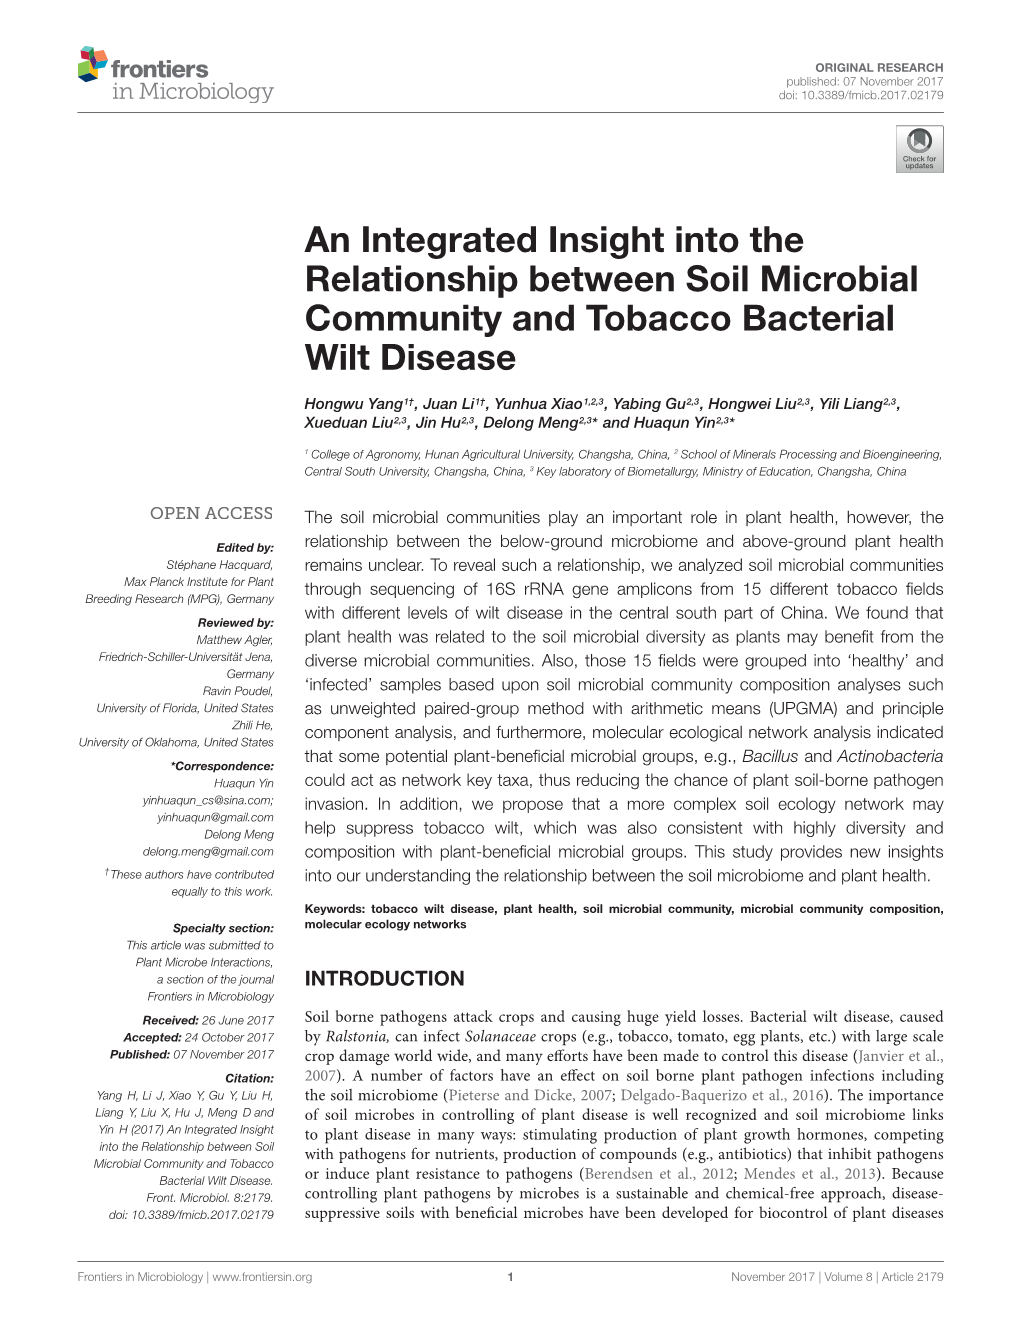 An Integrated Insight Into the Relationship Between Soil Microbial Community and Tobacco Bacterial Wilt Disease